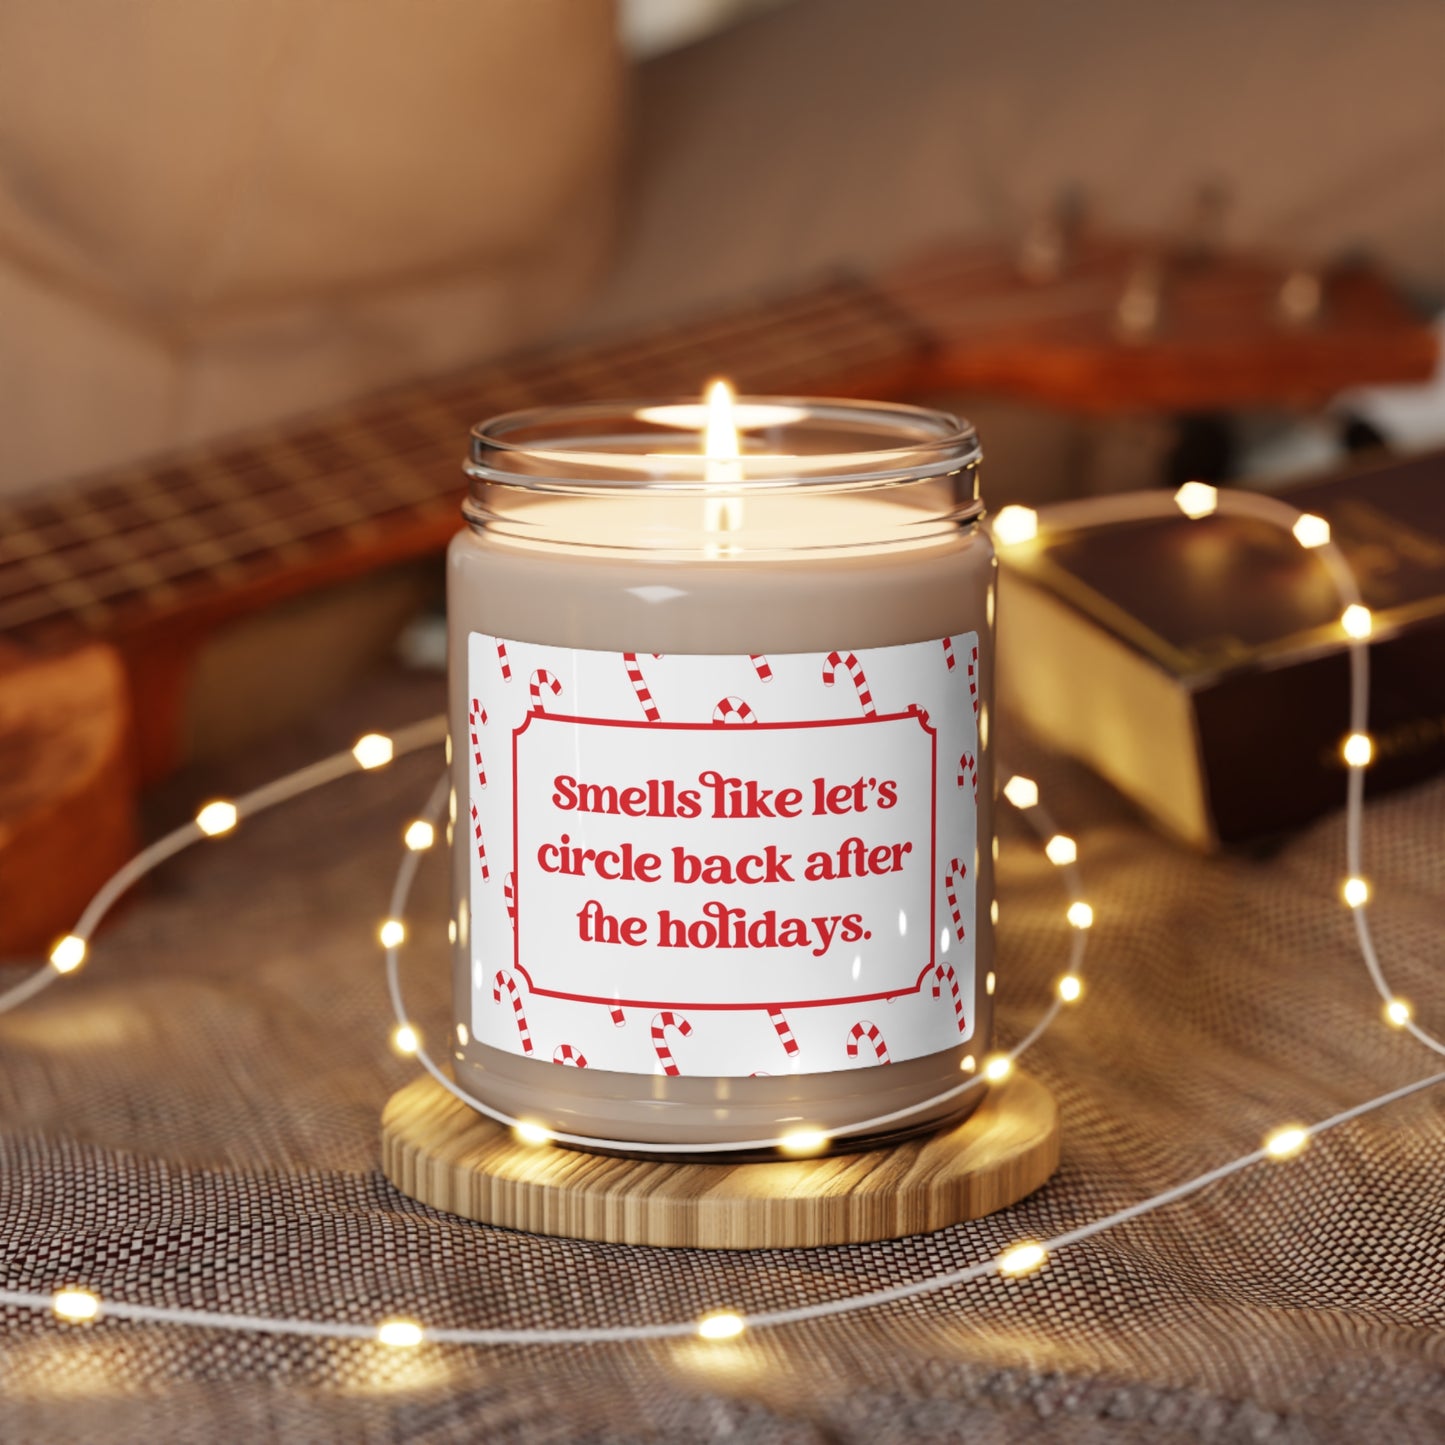 Smells Like Let's Circle Back After the Holidays Candle